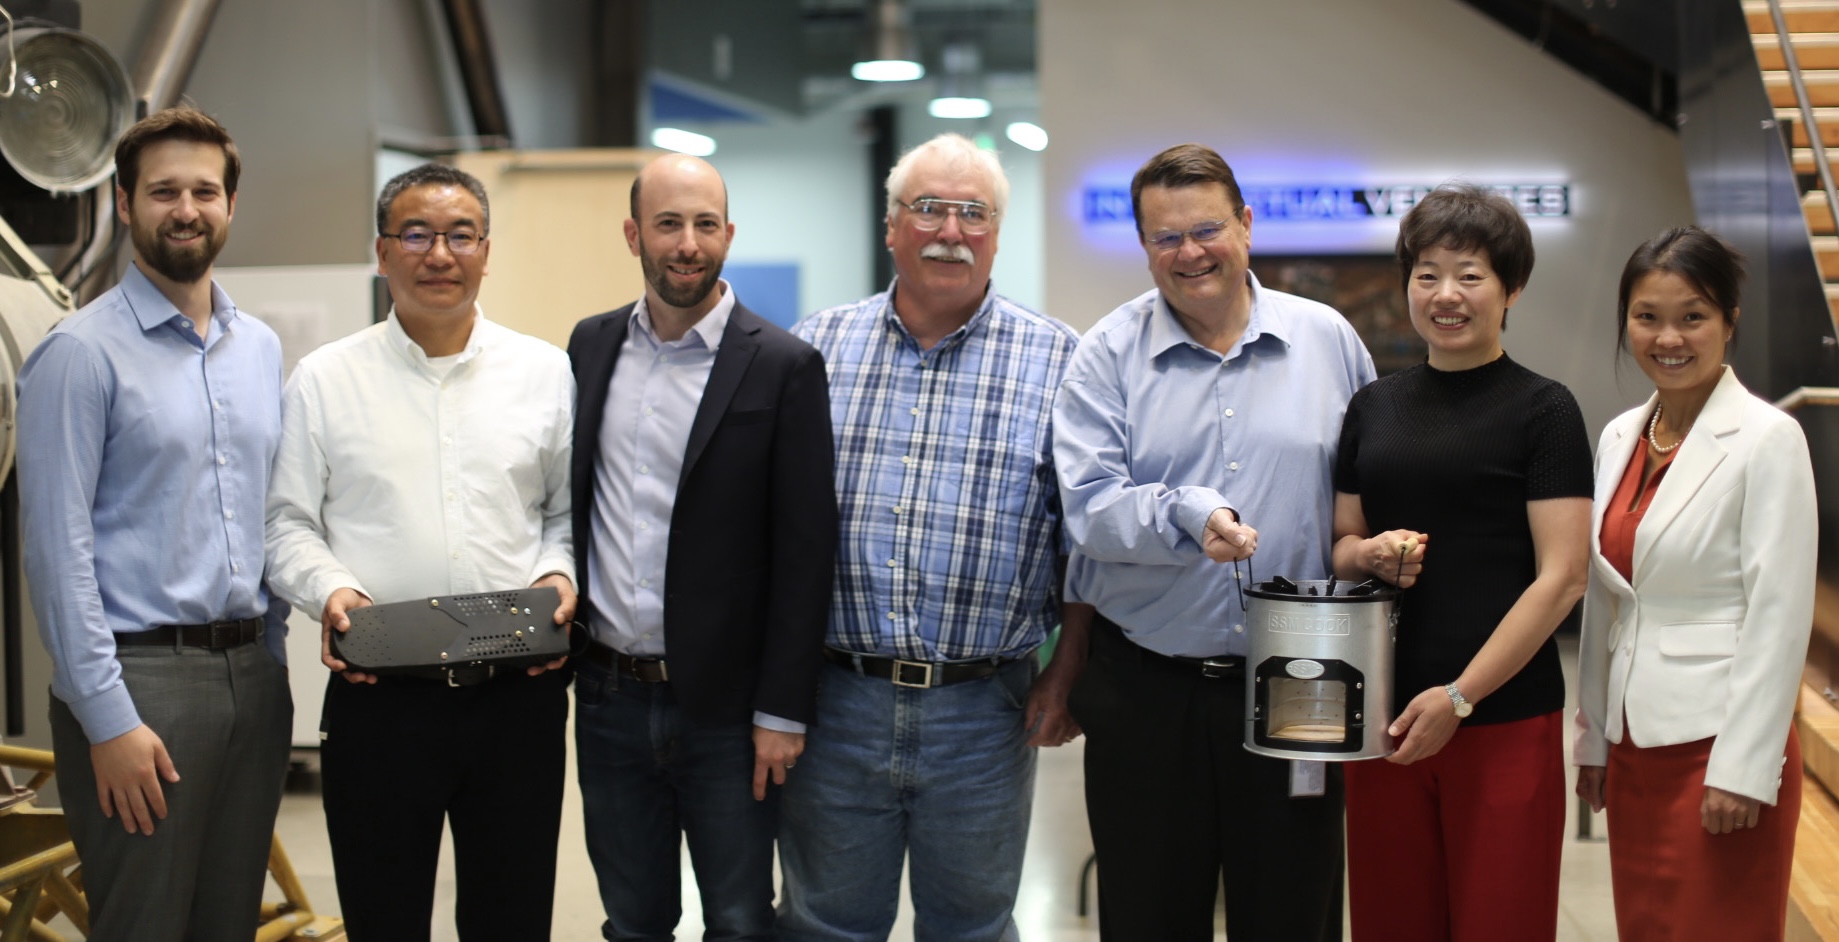 Global Health Labs, Shengzhou Stove Manufacturer and Aprovecho teams show off the Jet-Flame